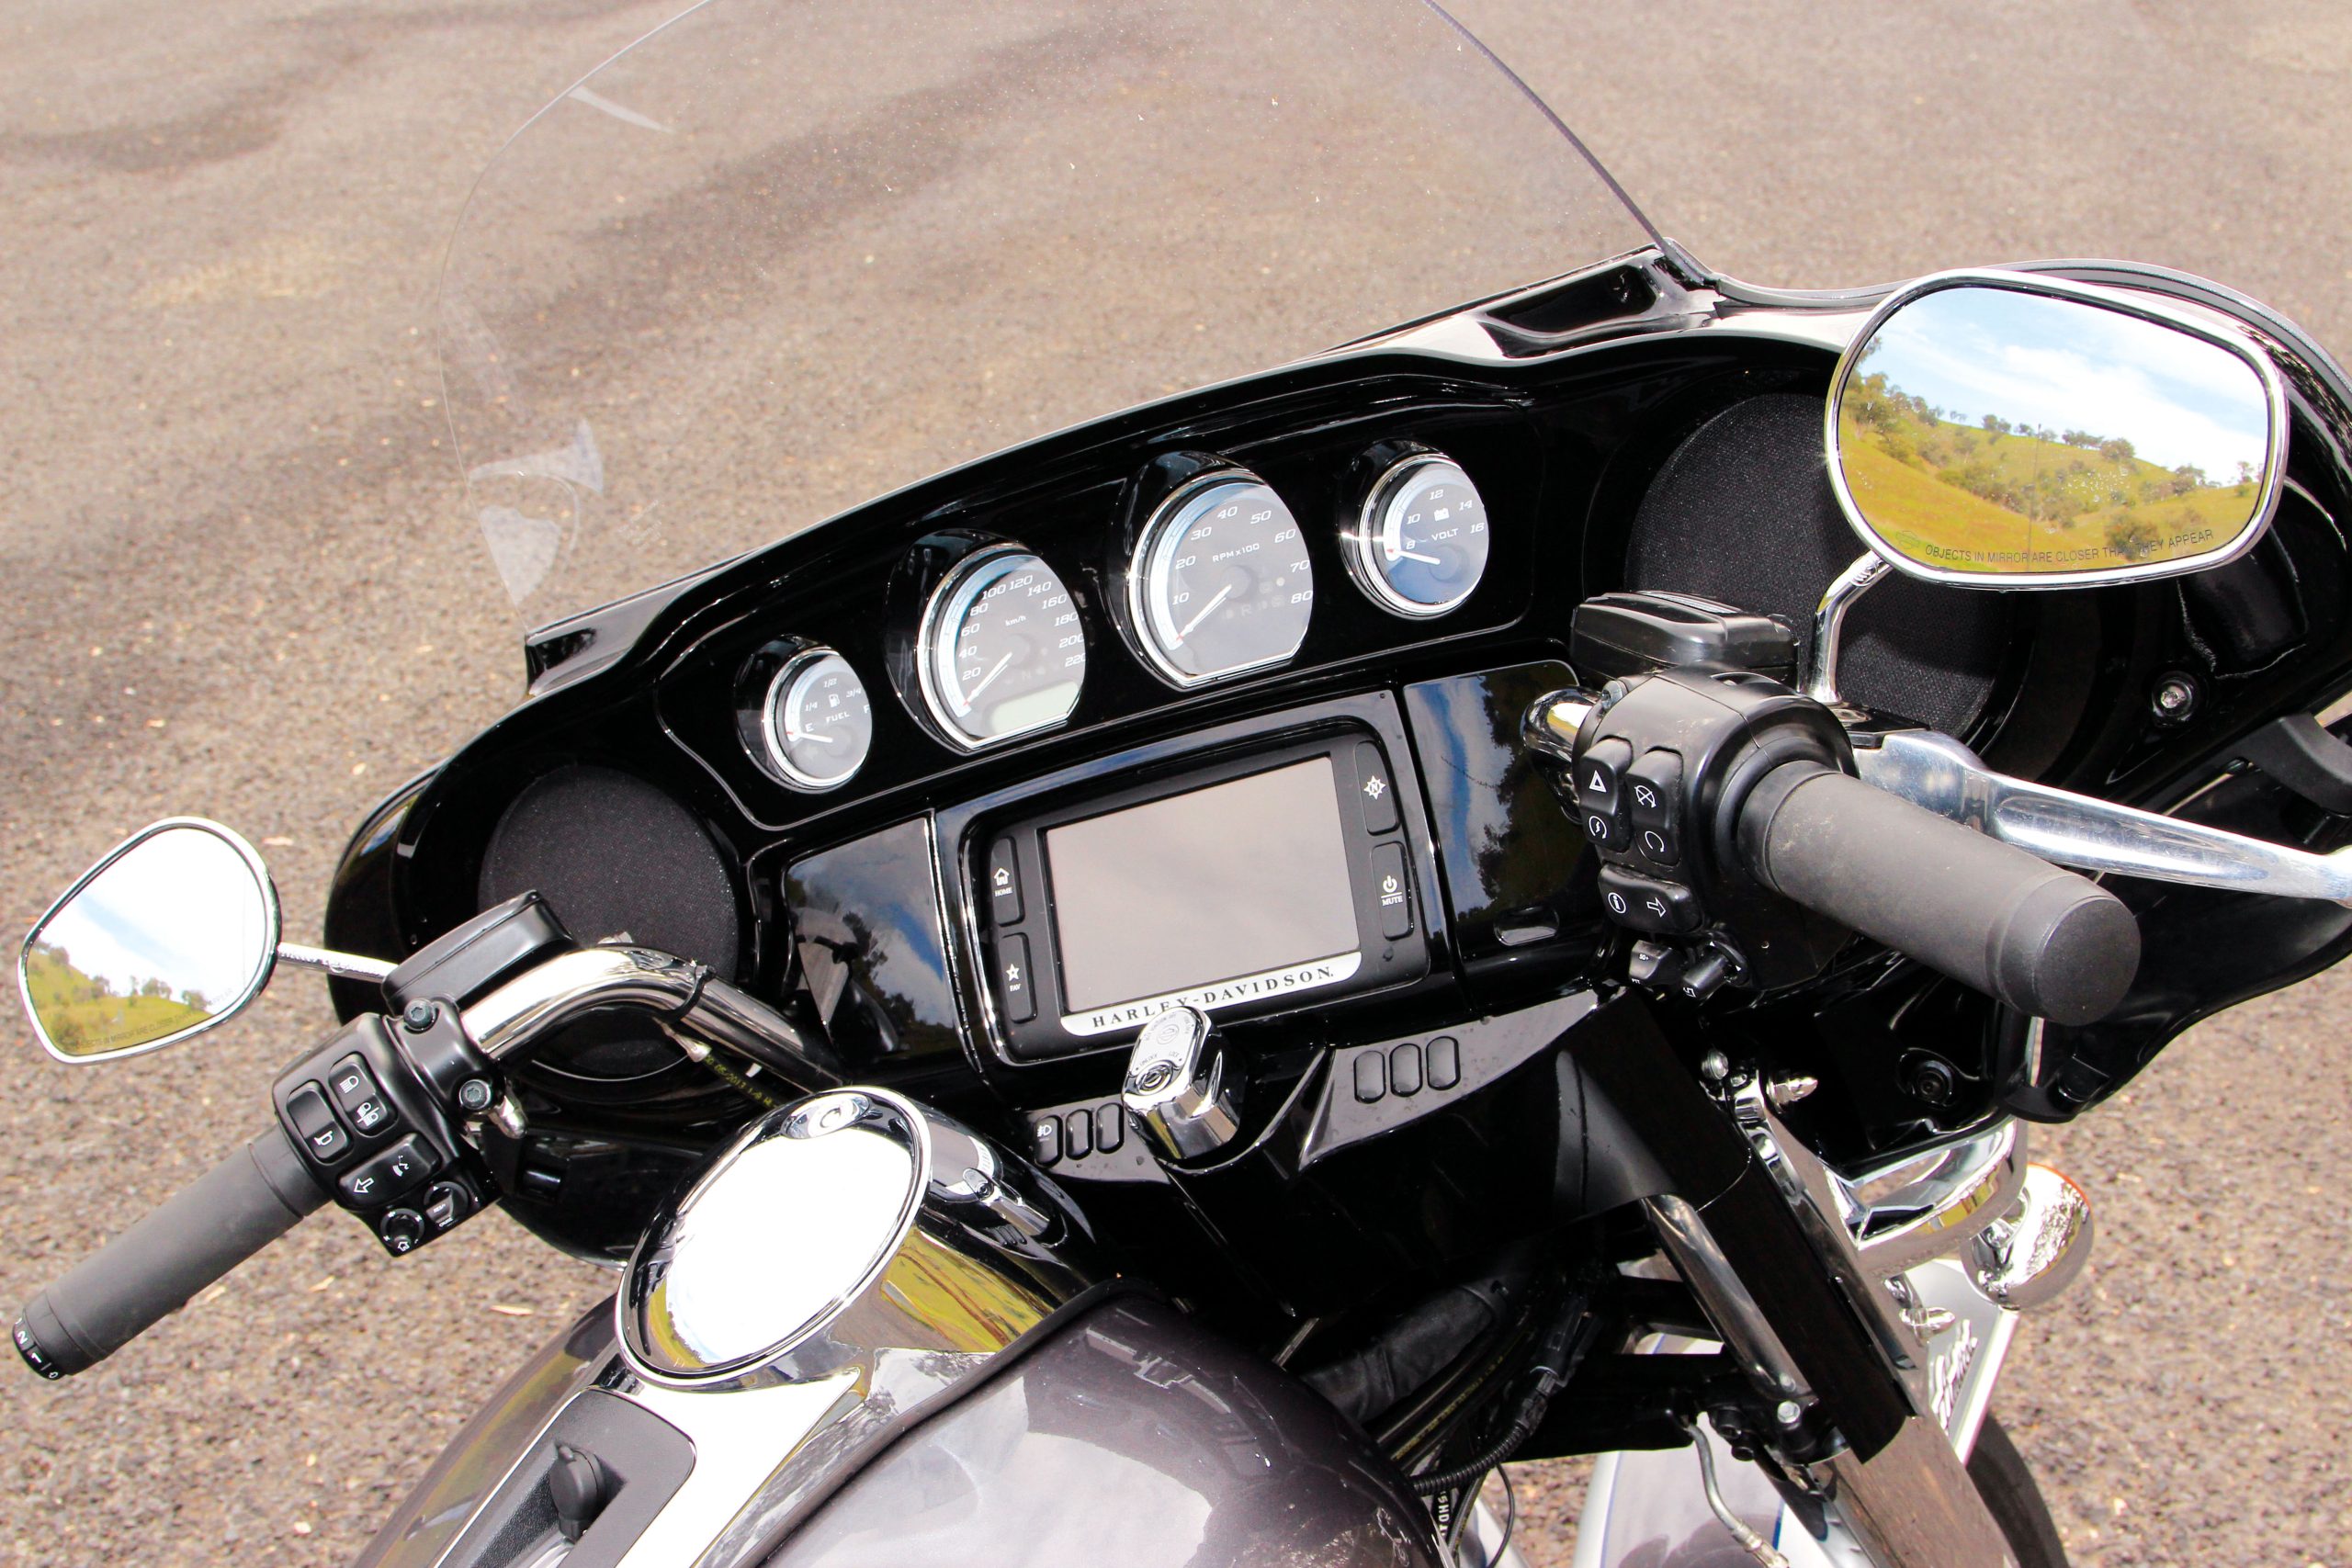 "10 Must-Have Accessories for Every Motorcycle Enthusiast"